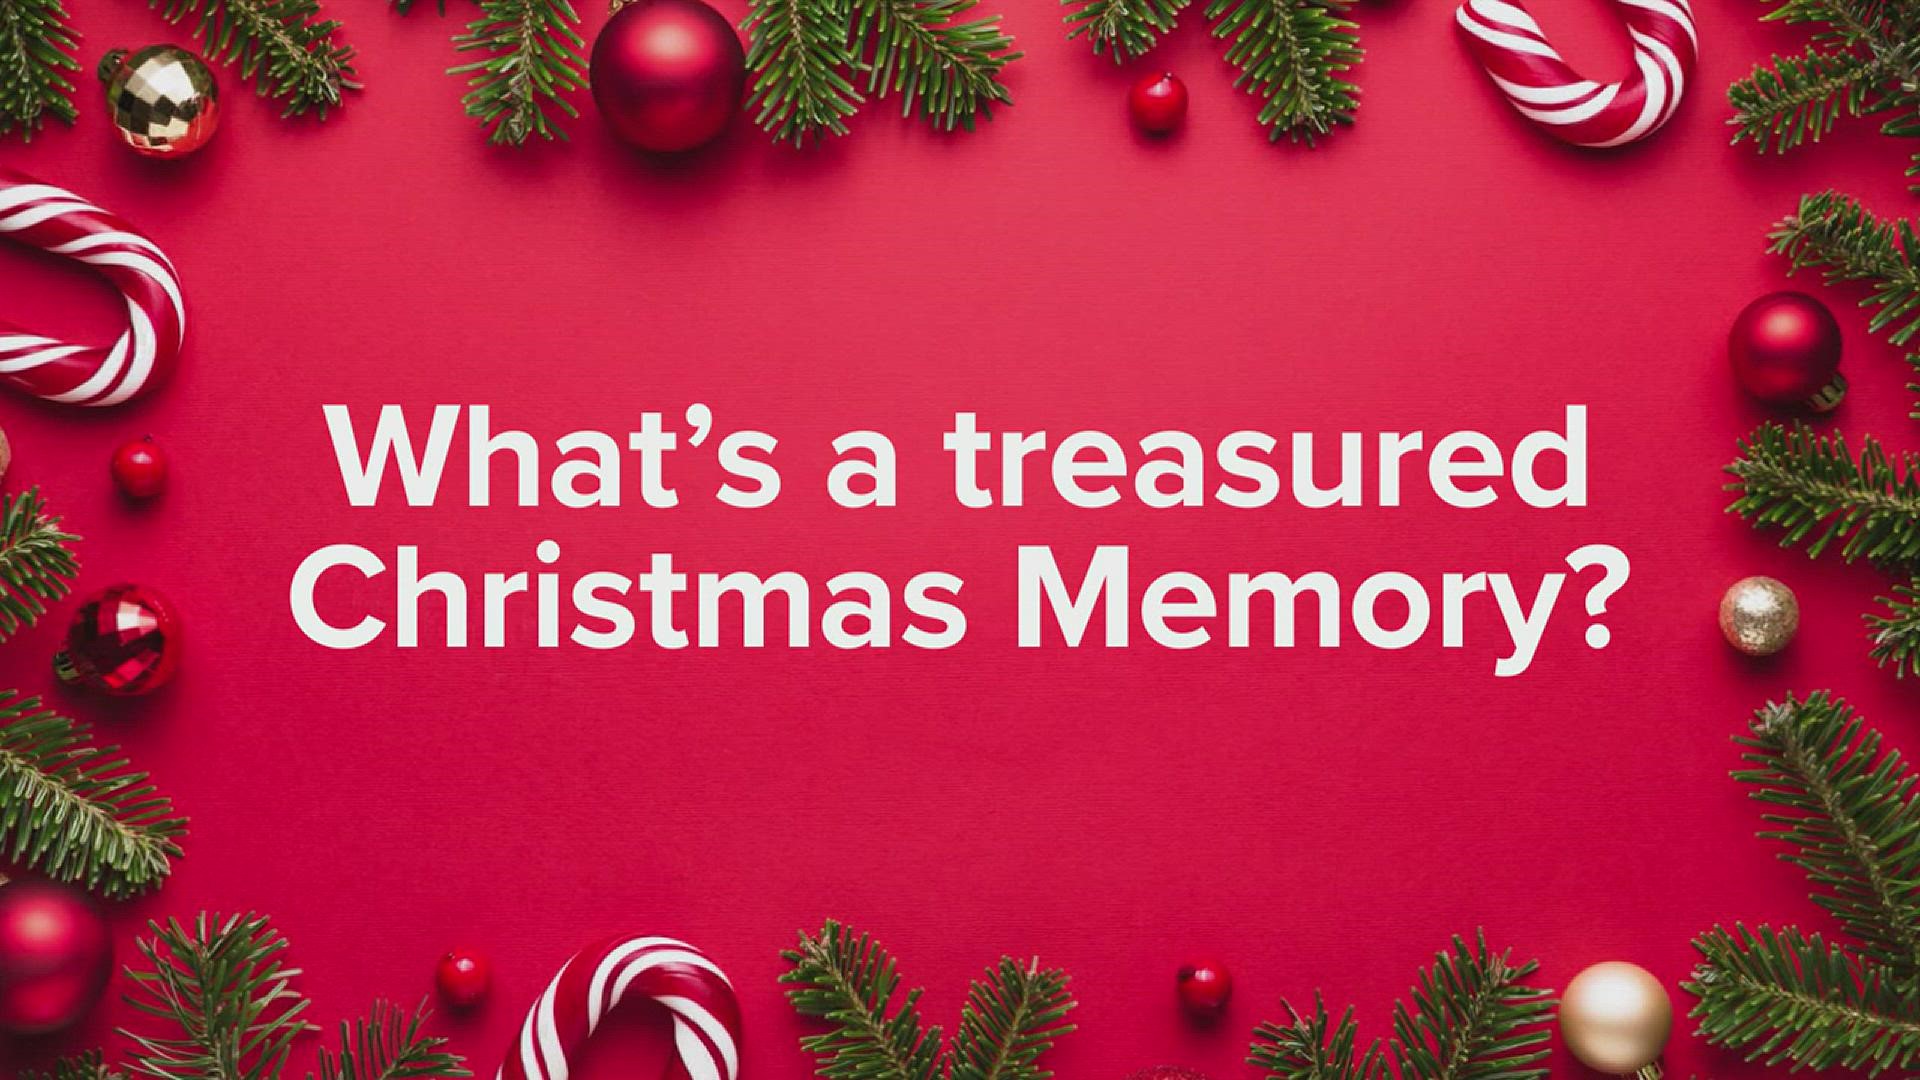 It's the memories we make during the holiday season that truly make it special. We asked our 12News staff what holiday memories they treasure most.